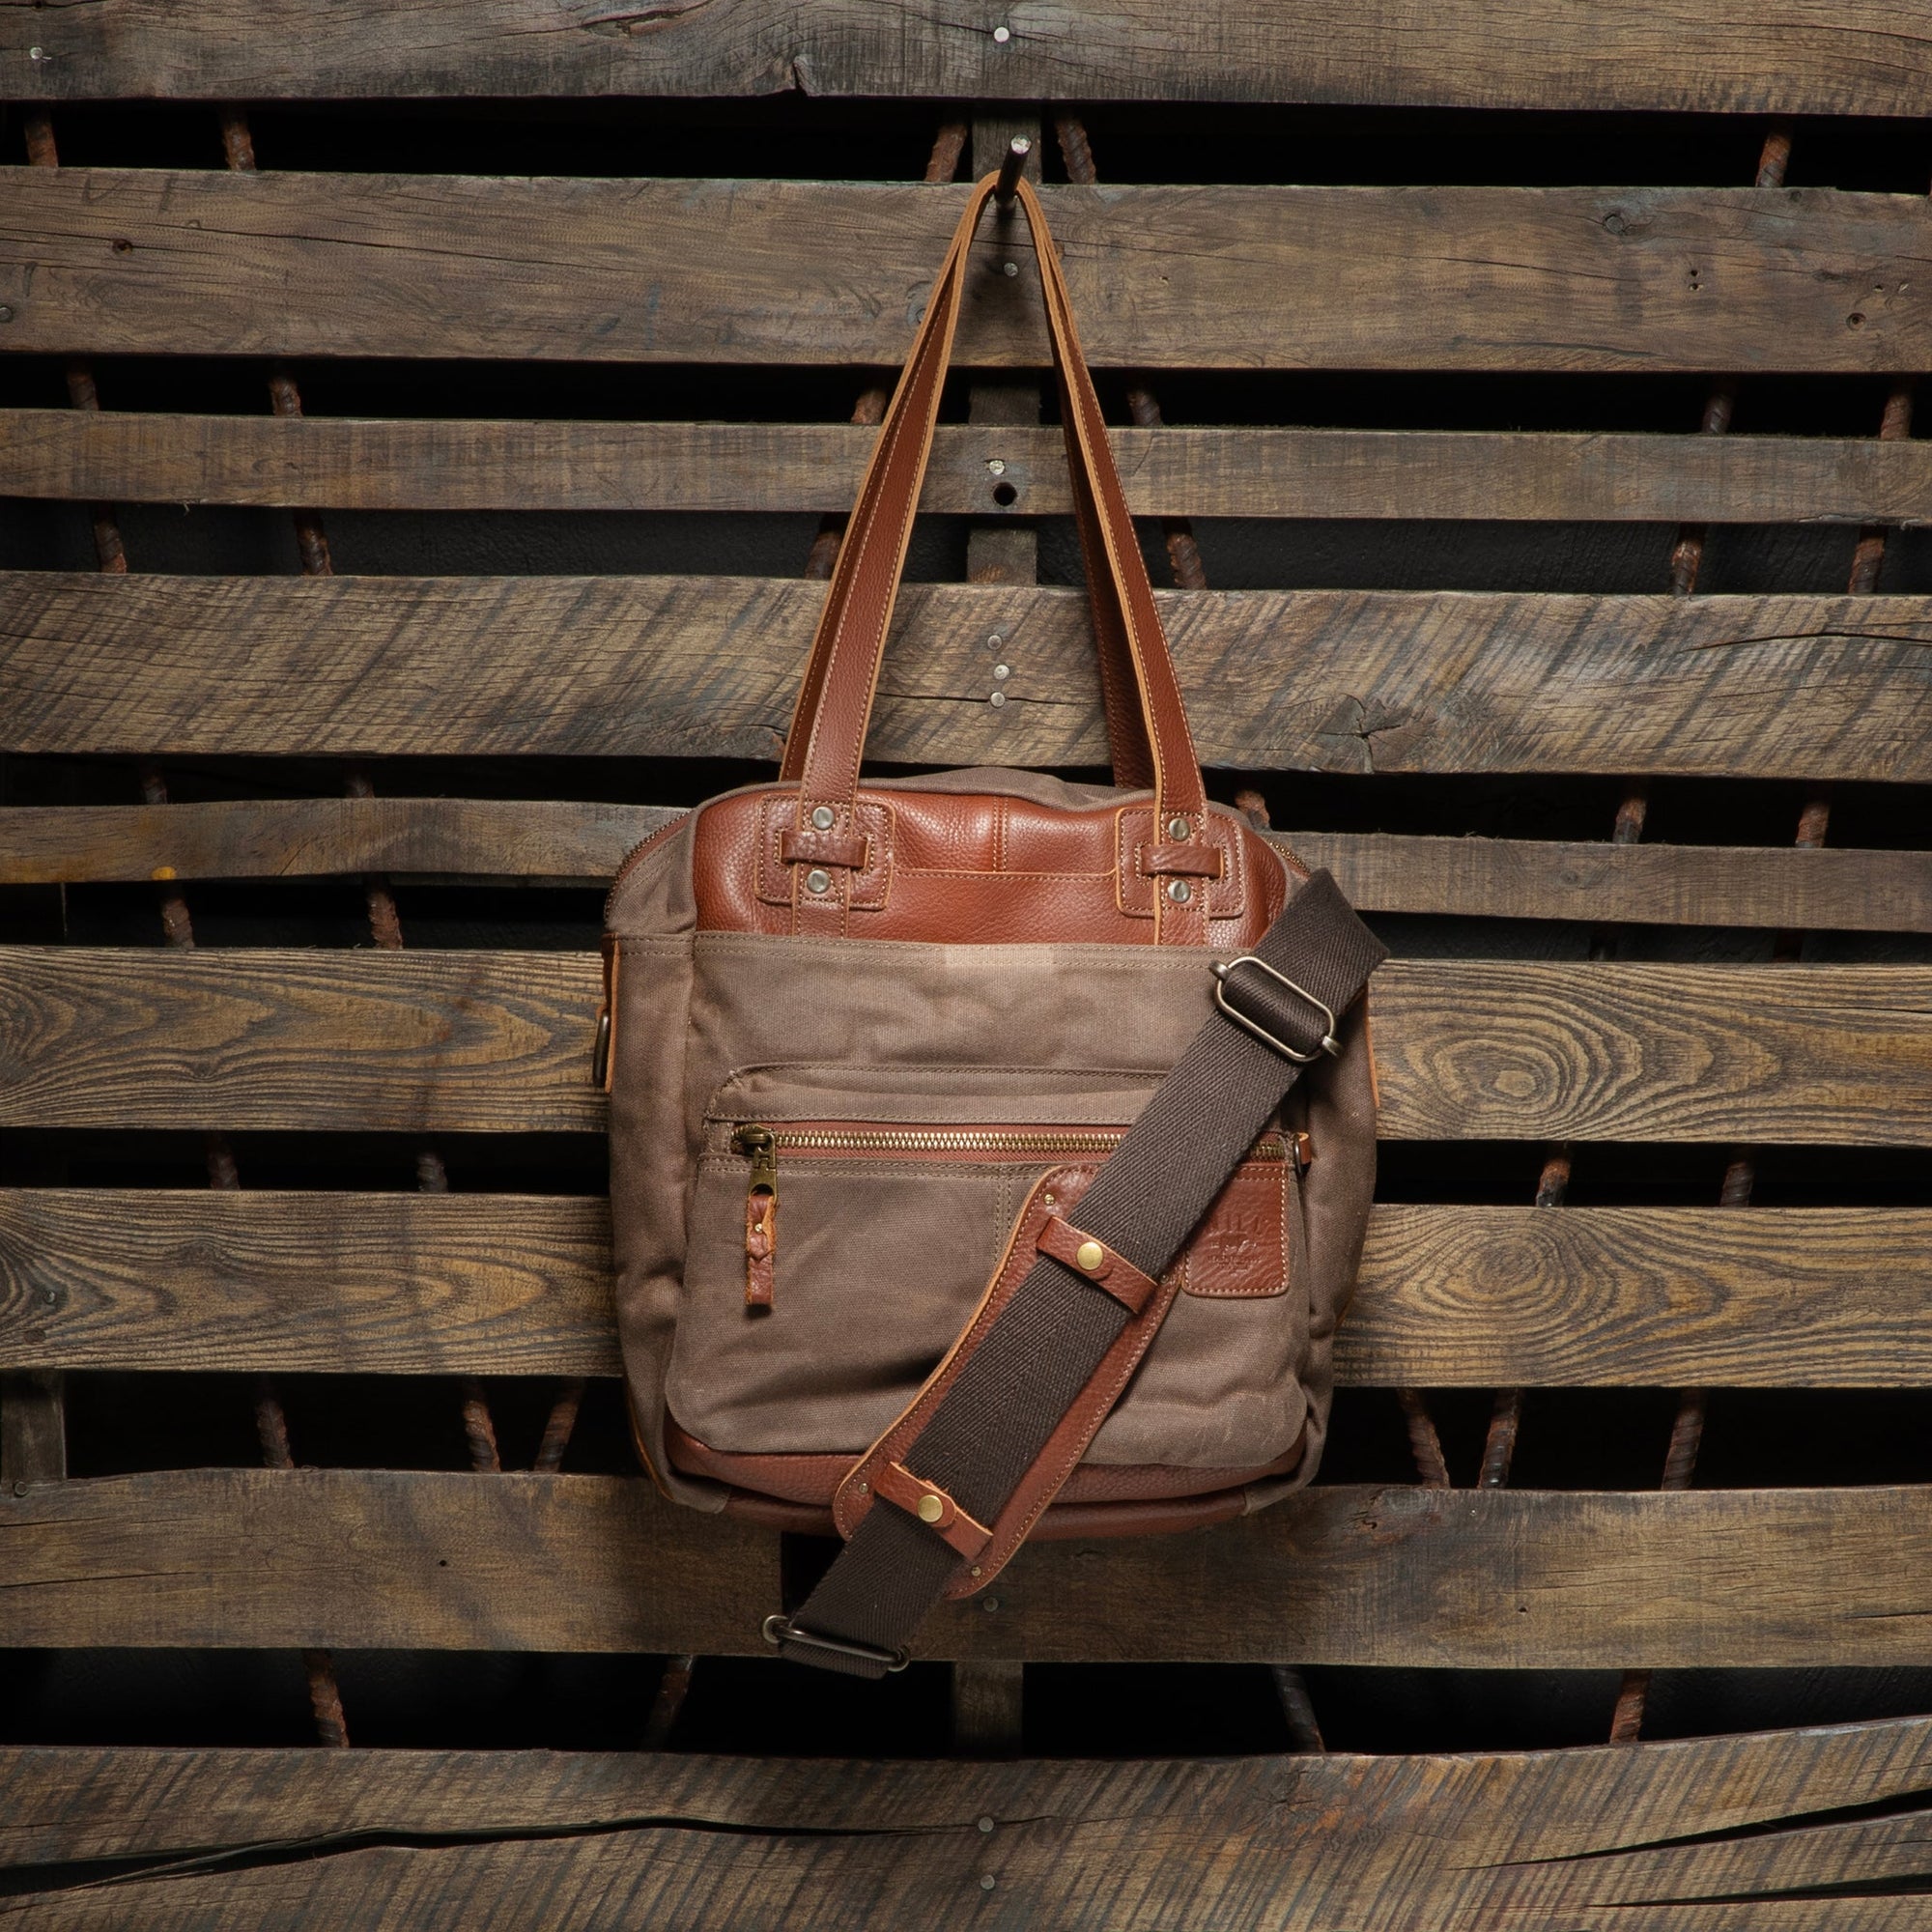 Waxed Canvas and Leather 'Adventure Collection' Onward Tote in Tobacco/Mahogany by Will Leather Goods